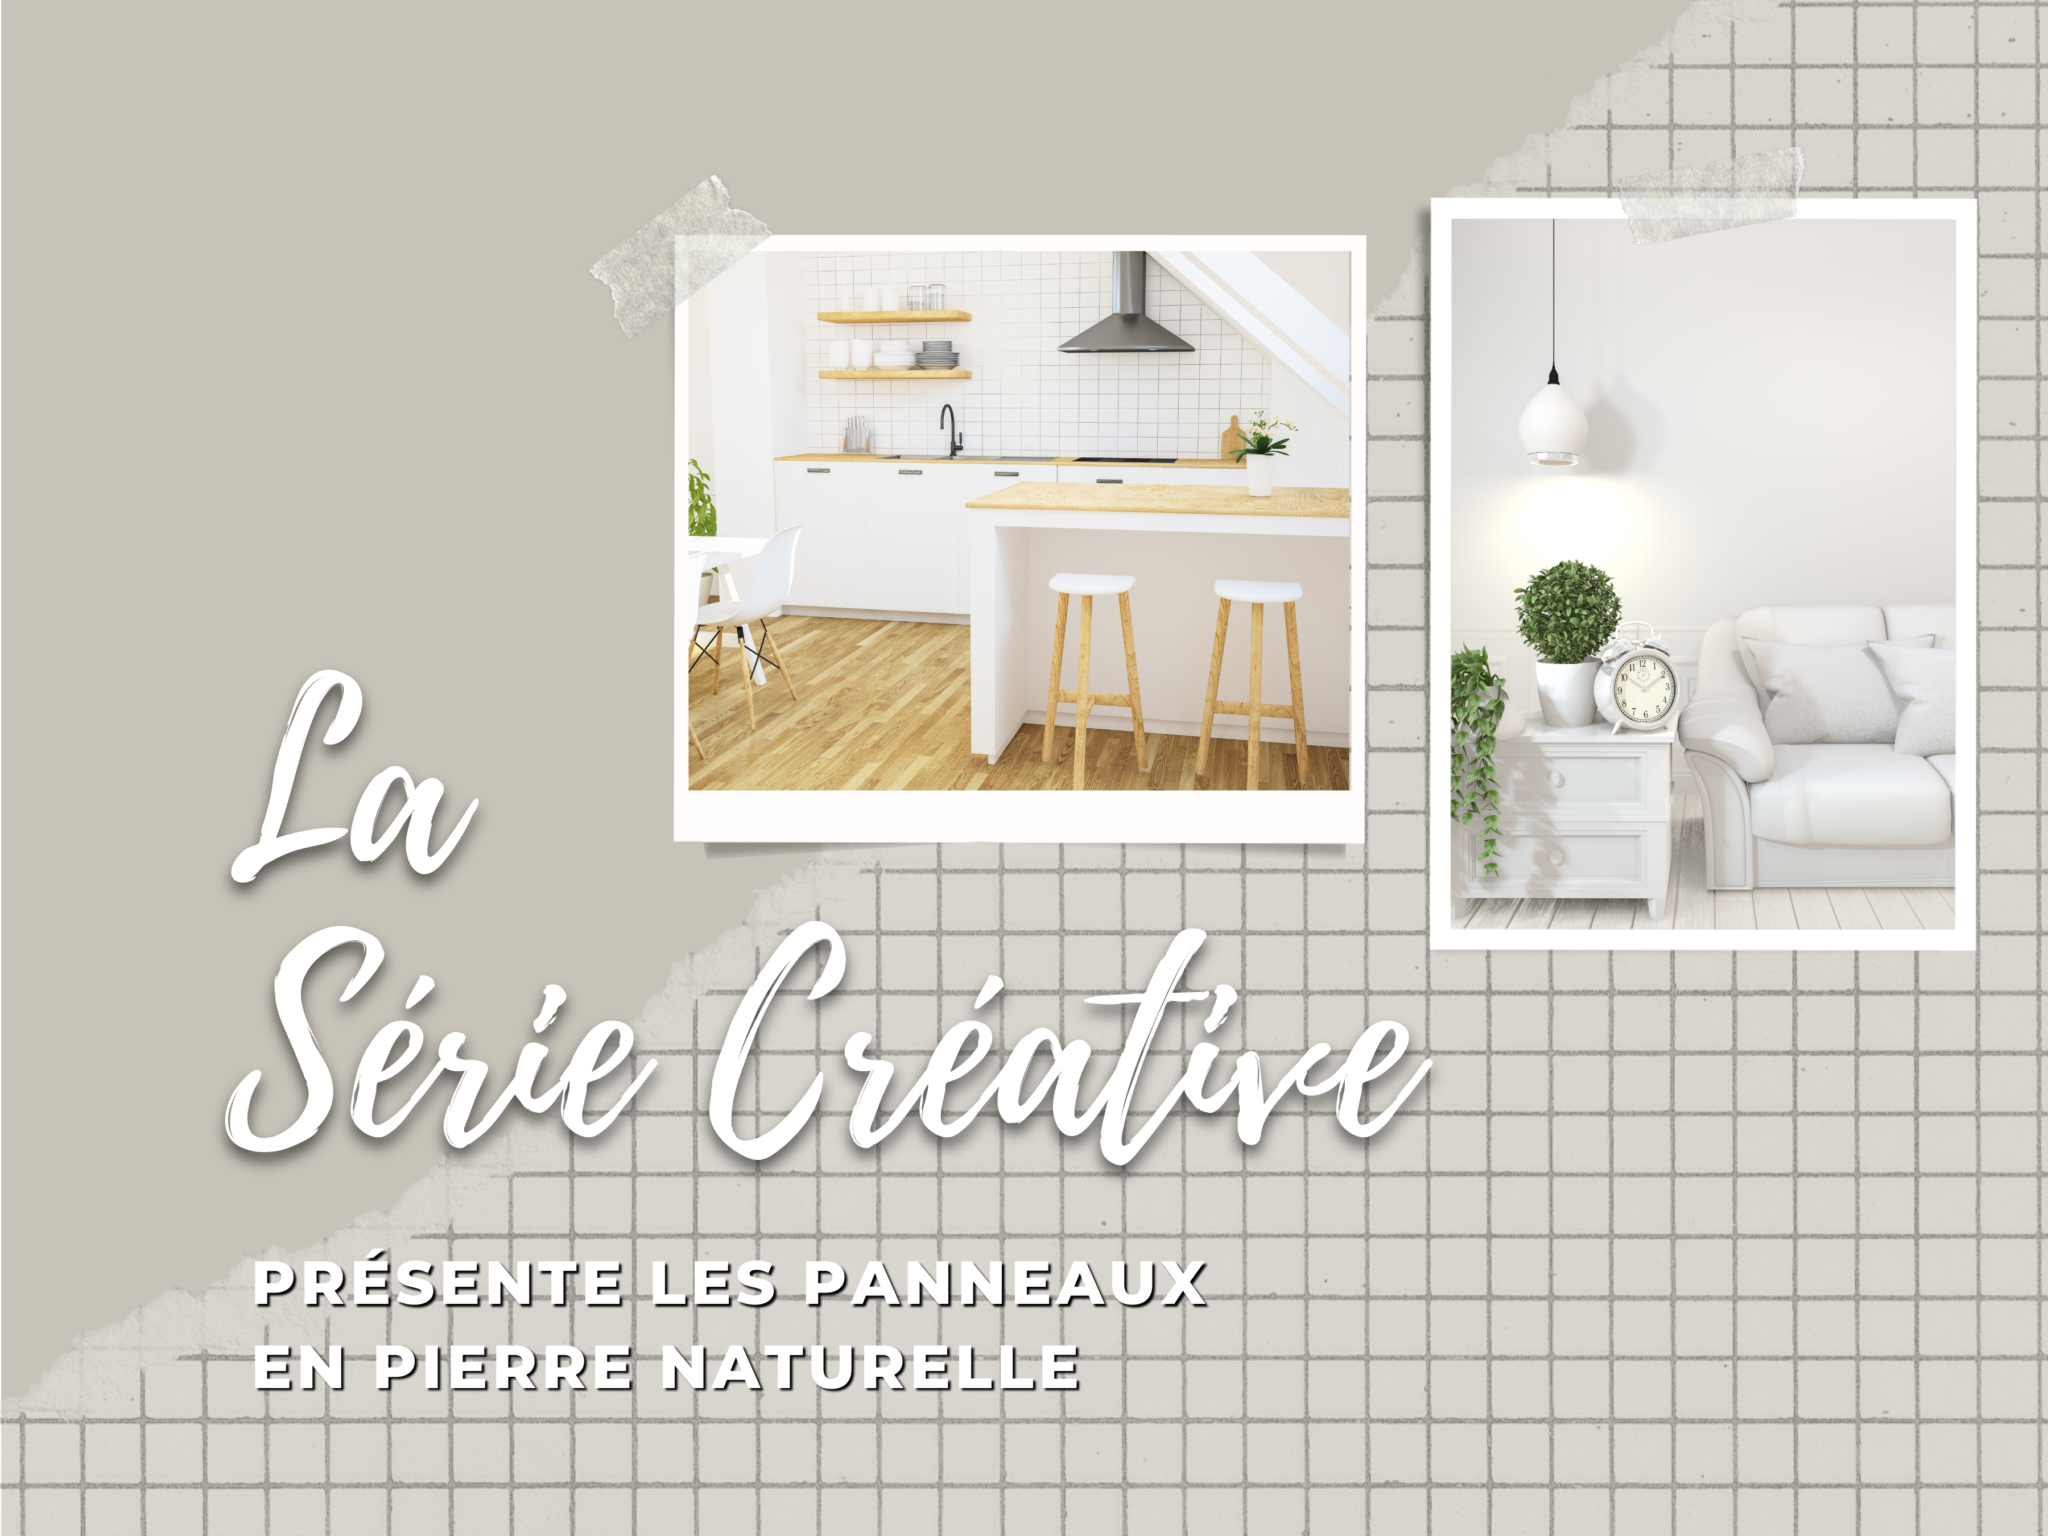 The Creative Series ft. Natural Stone Panels